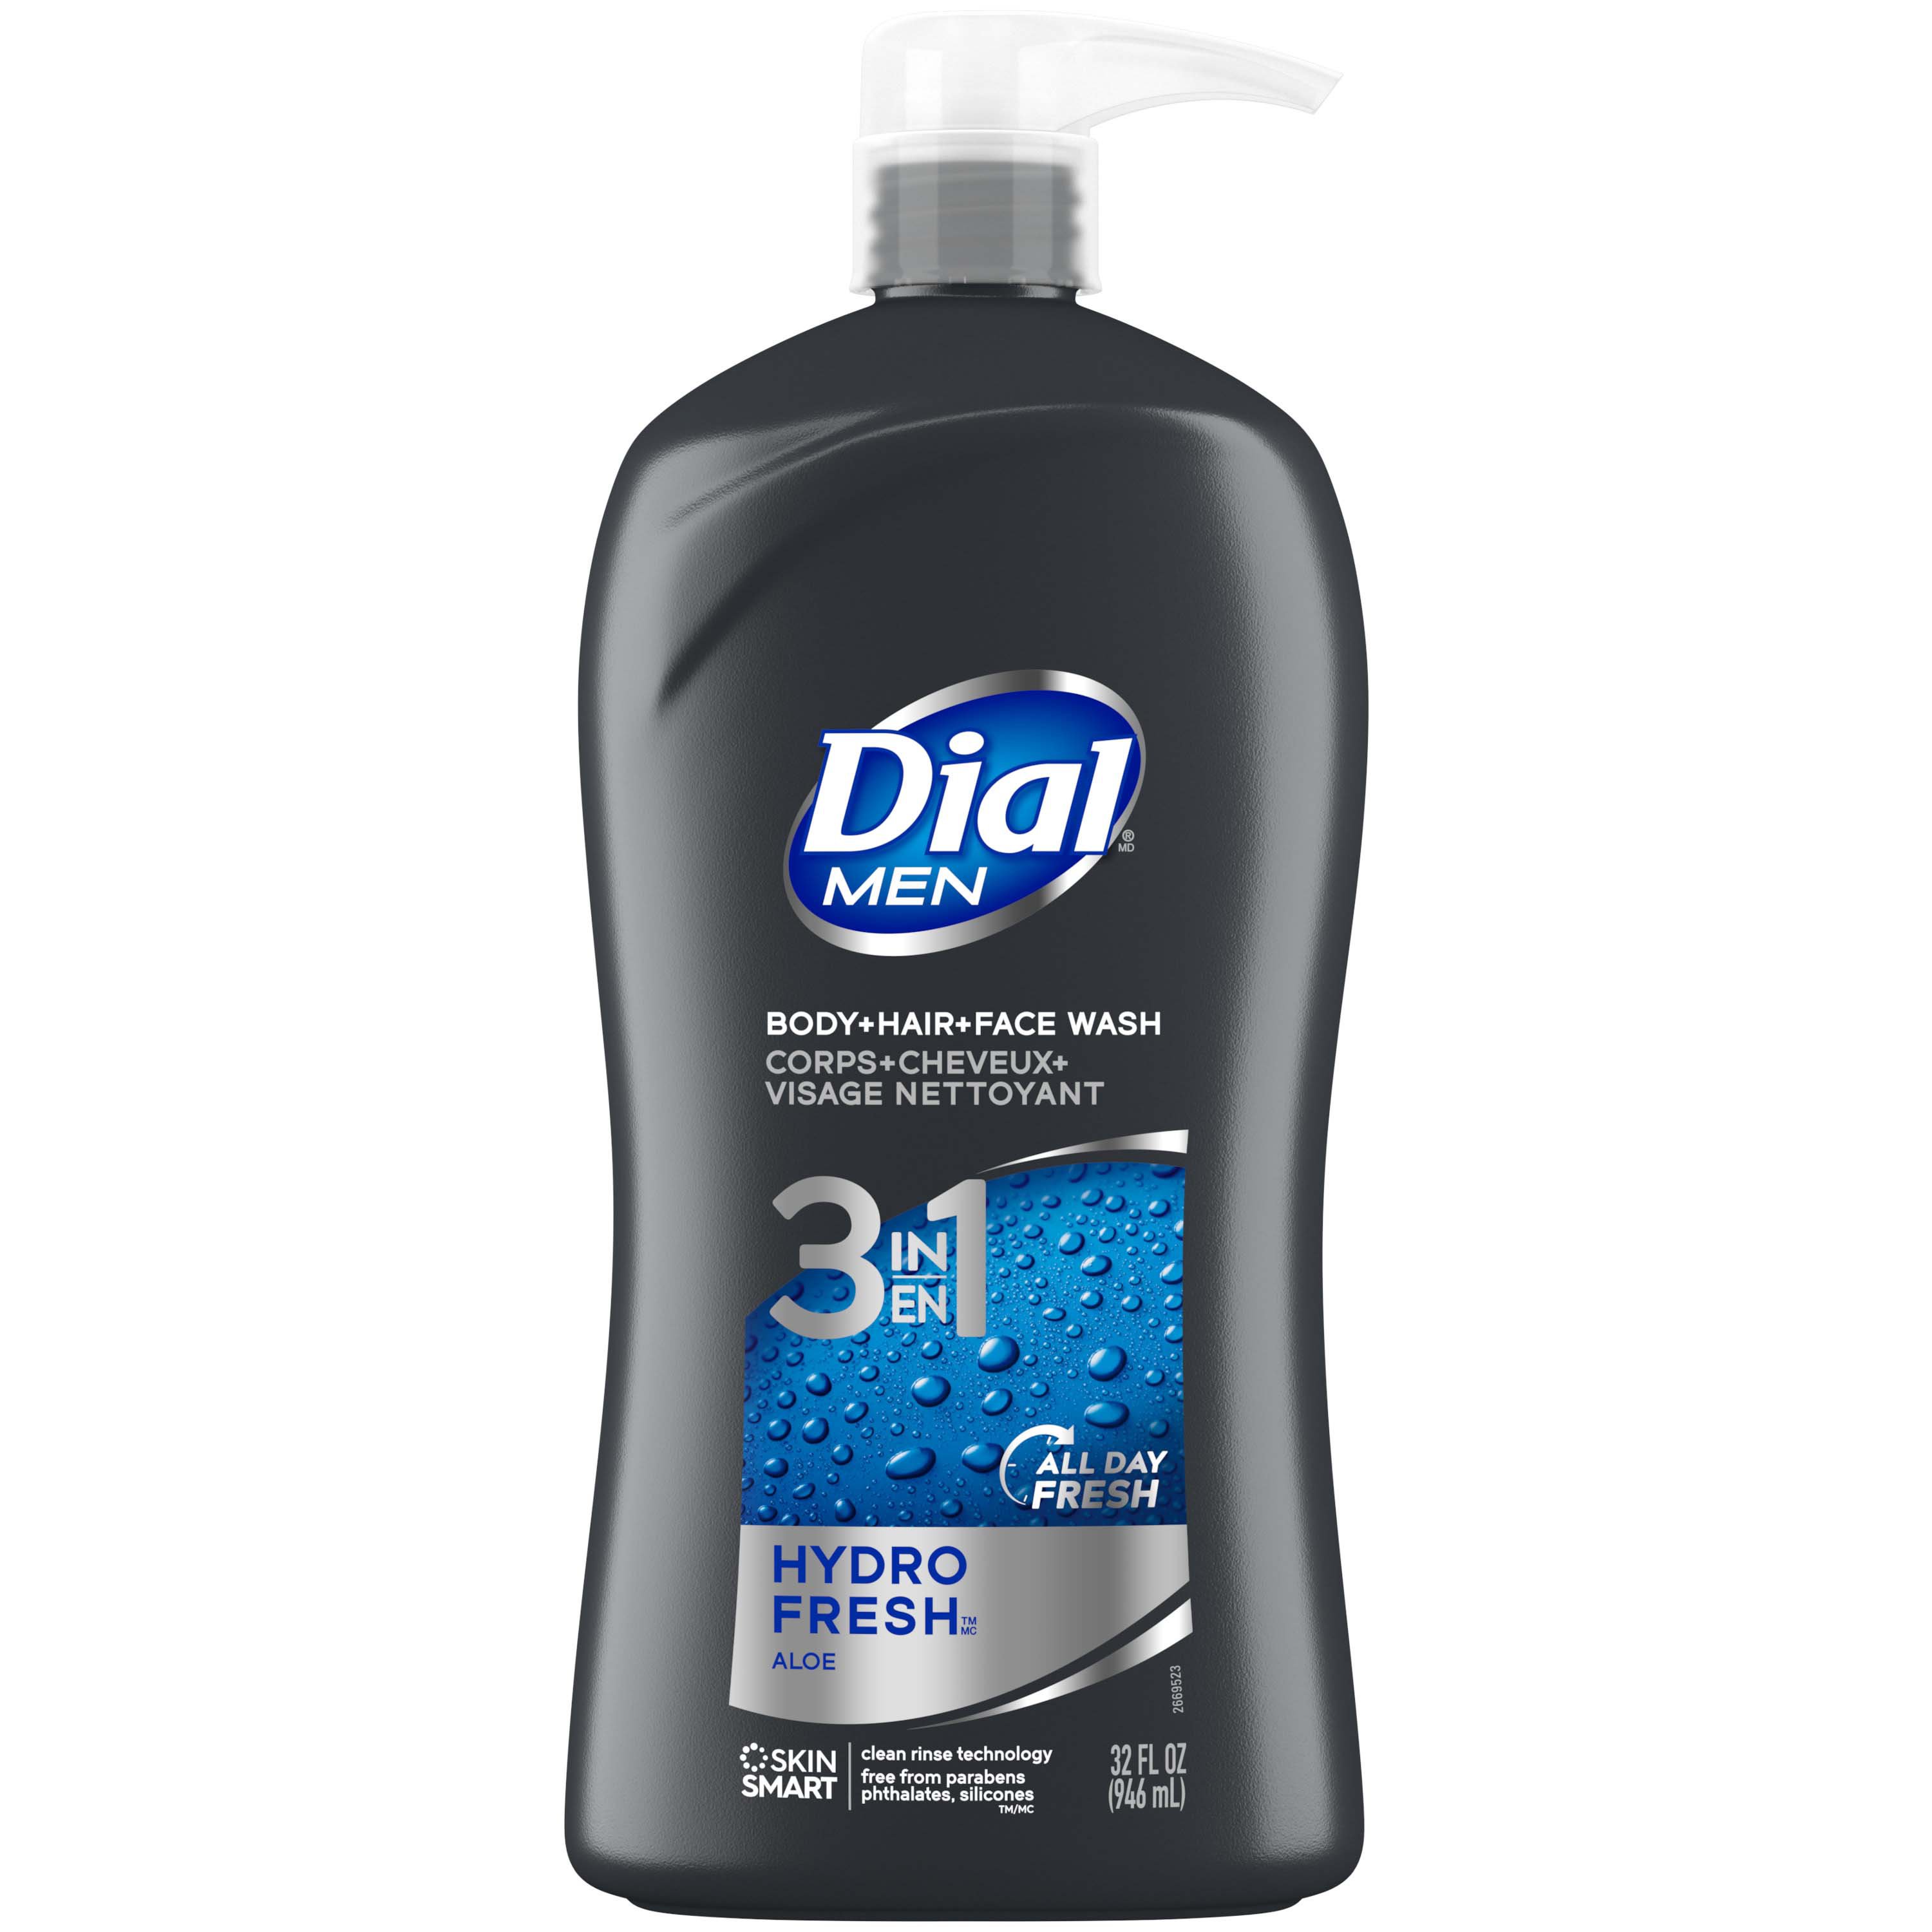 Dial Men 3in1 Body, Hair and Face Wash - Hydro Fresh - Shop Body